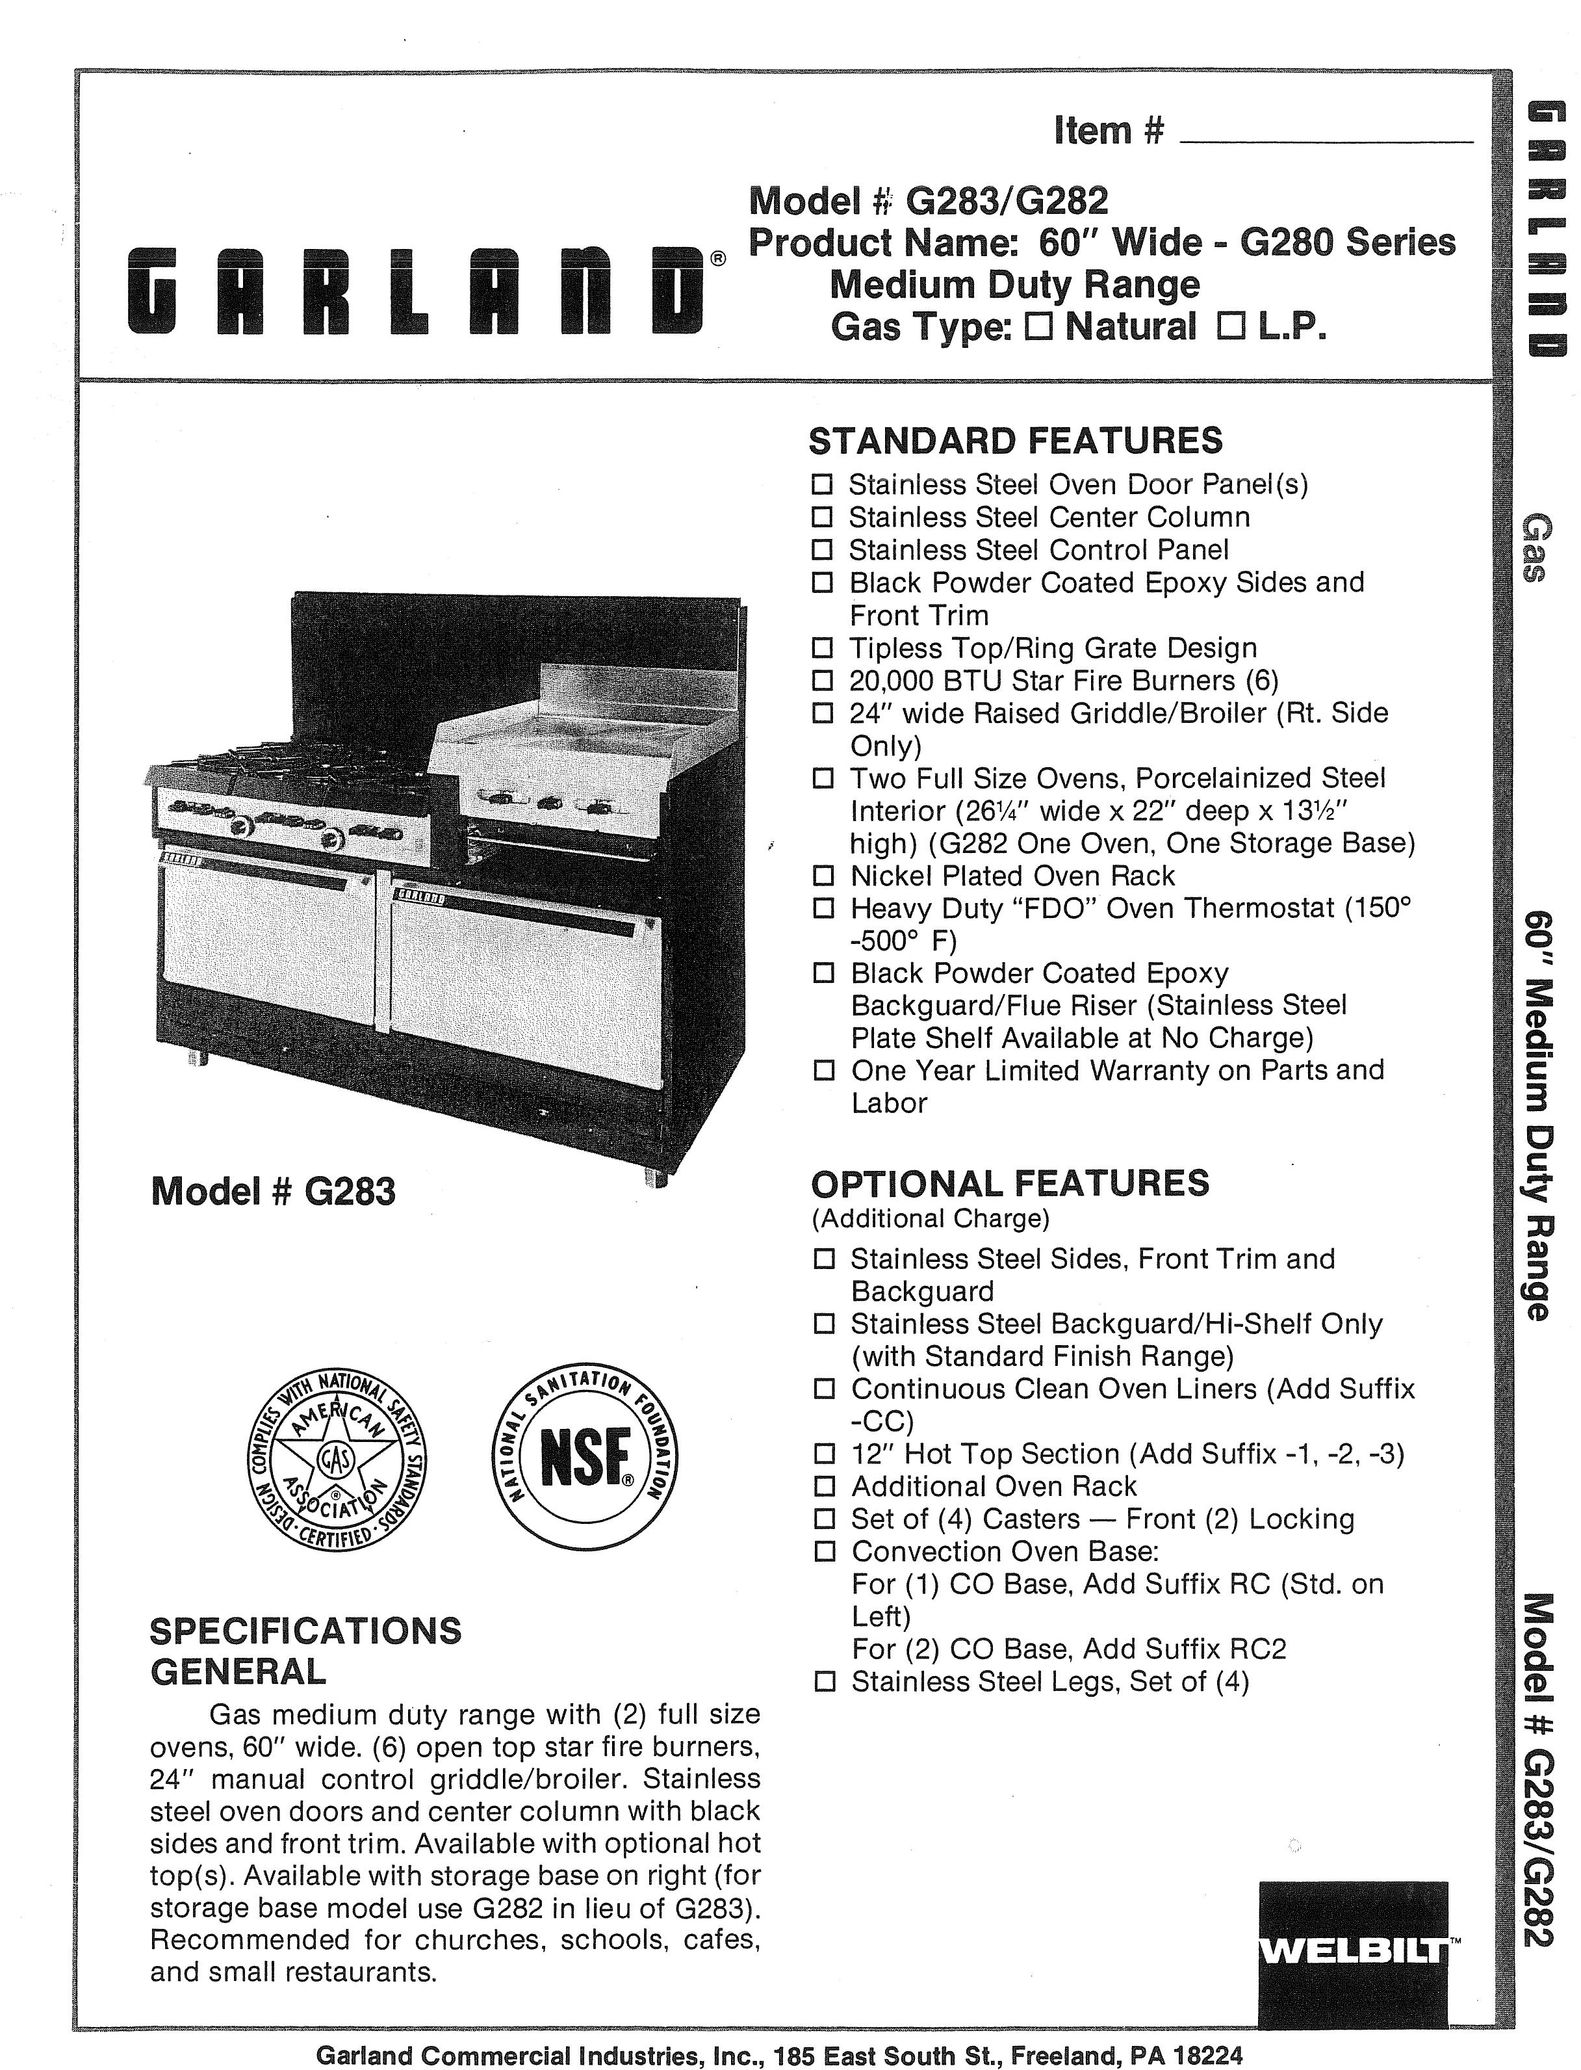 Garland G283 Double Oven User Manual